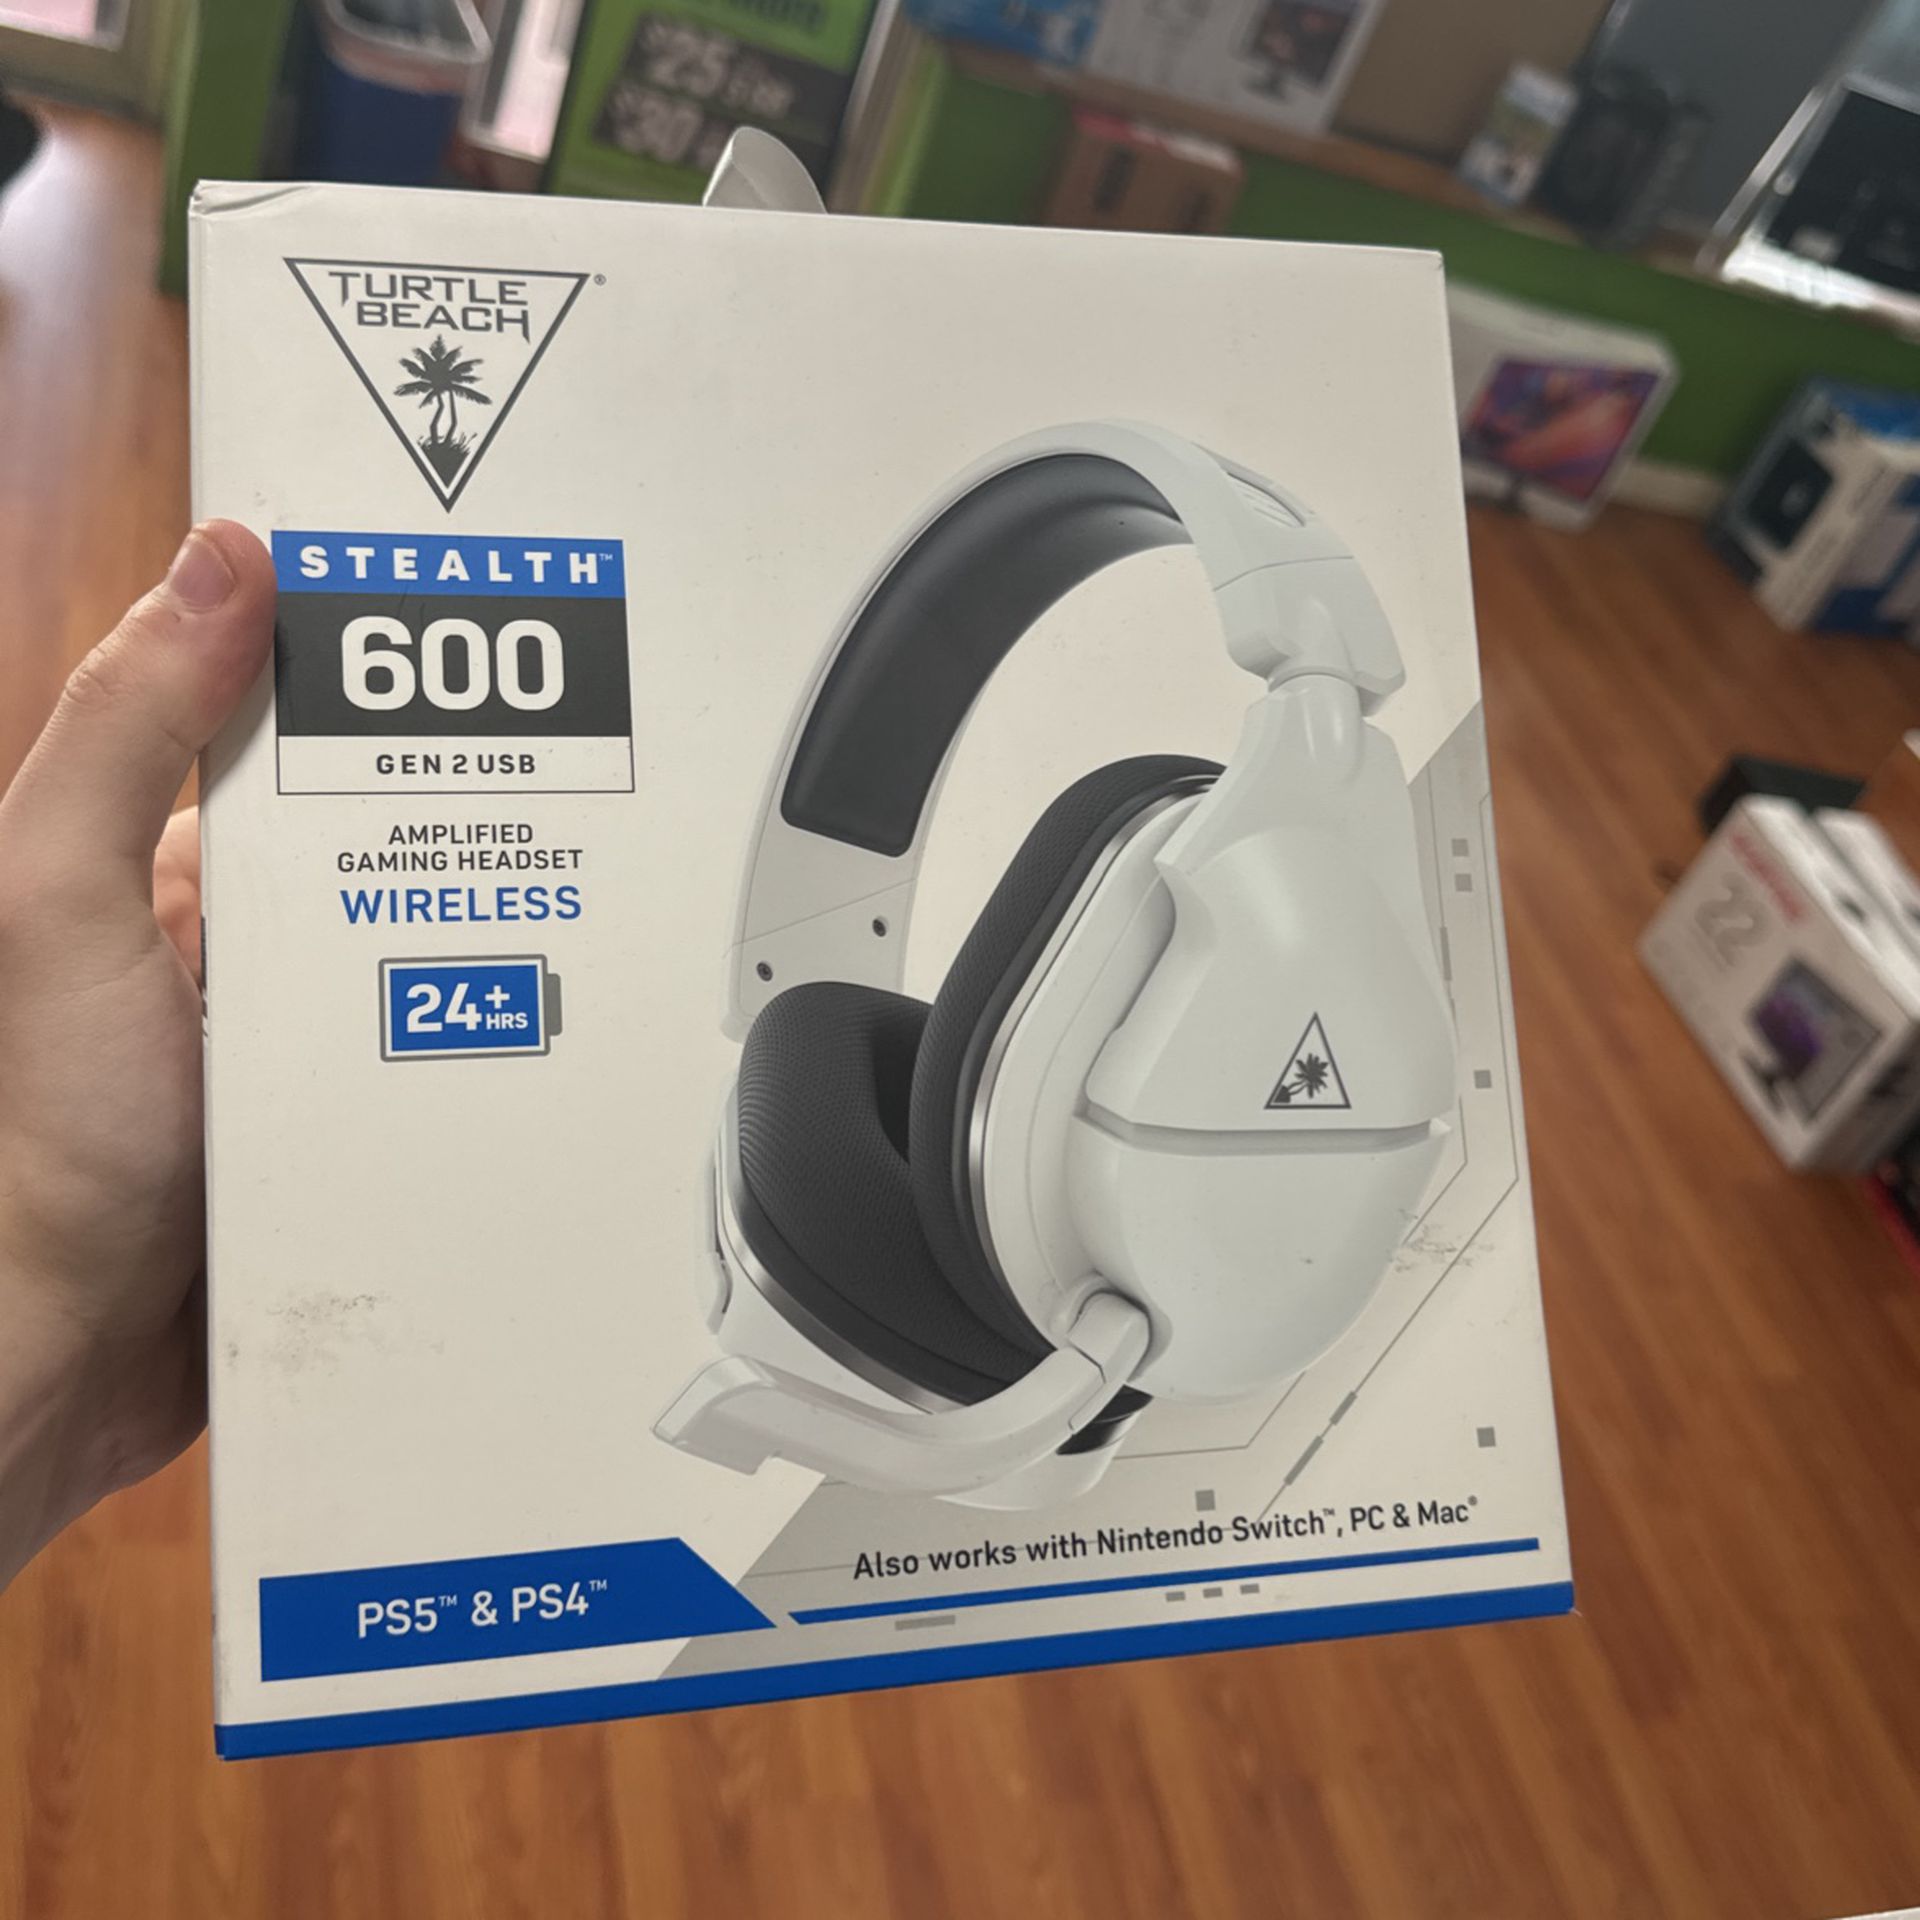 Turtle Beach - Stealth 600 Gen 2 USB Wireless Amplified Video Gaming Headset for PS5, PS4 - White Brand New 